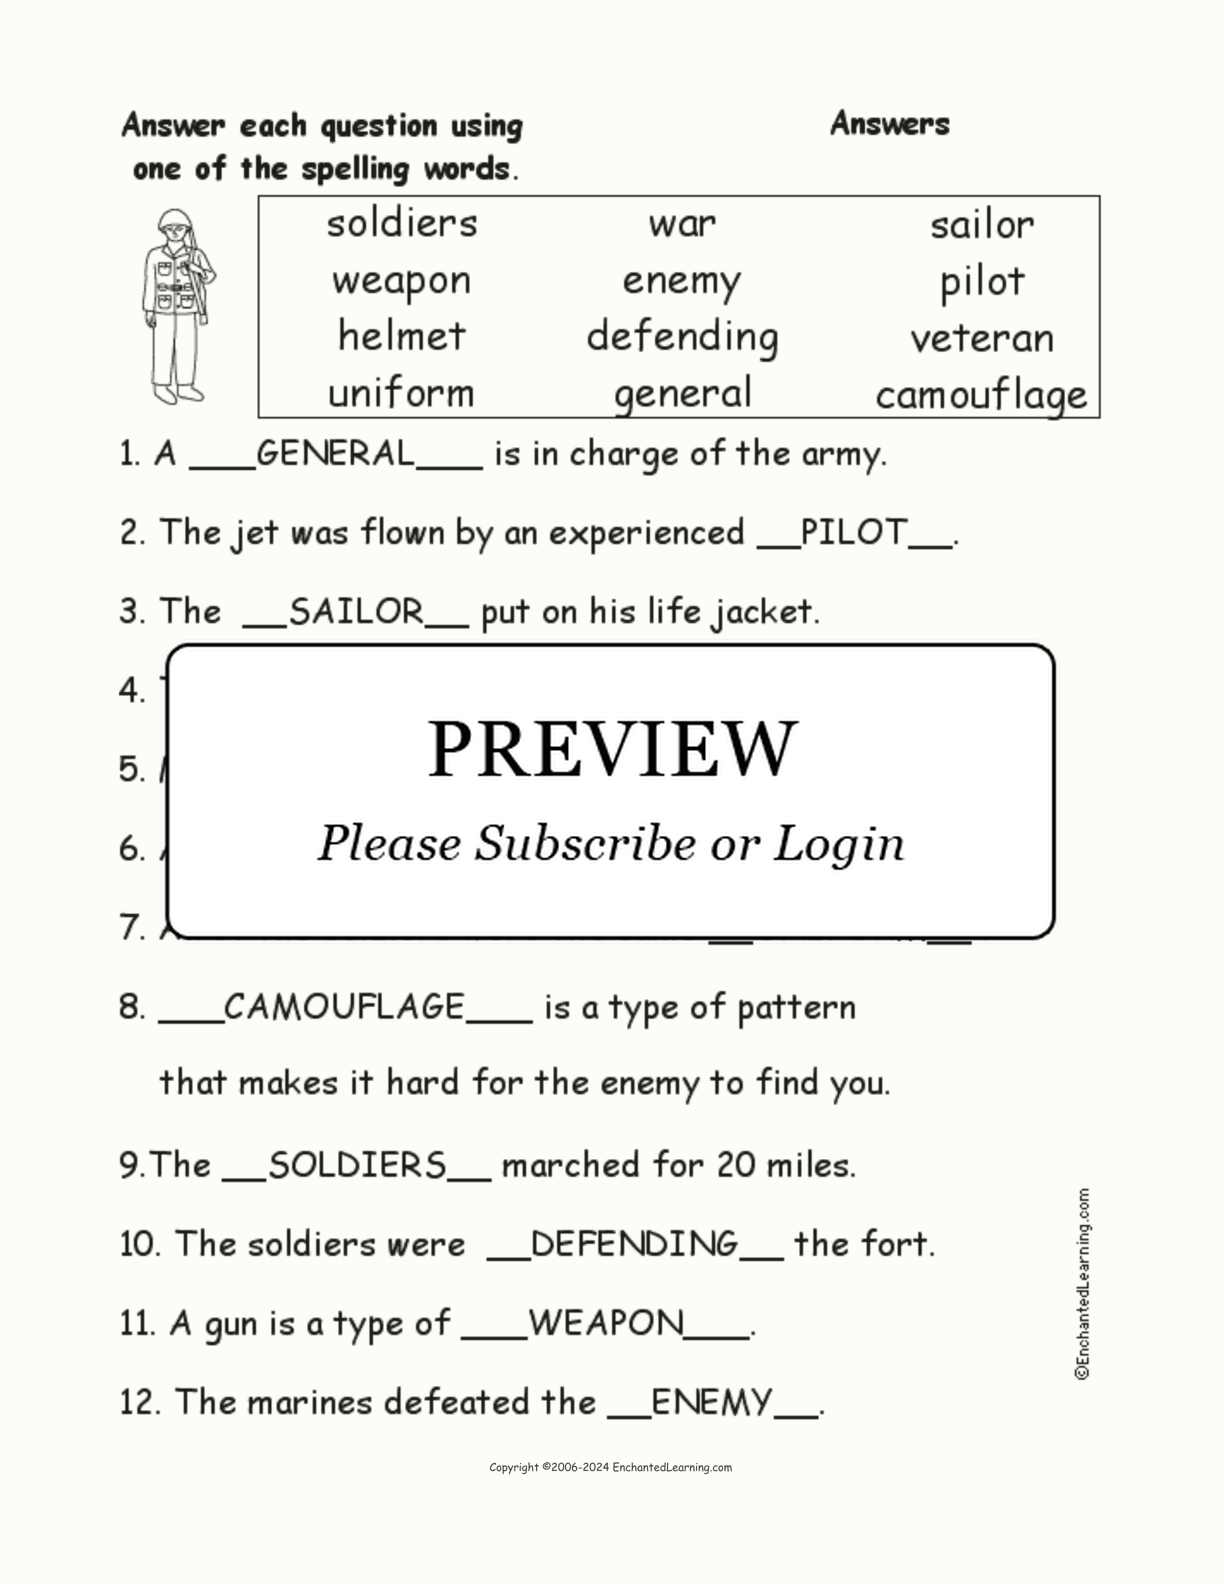 Veterans Day Spelling Word Questions interactive worksheet page 2